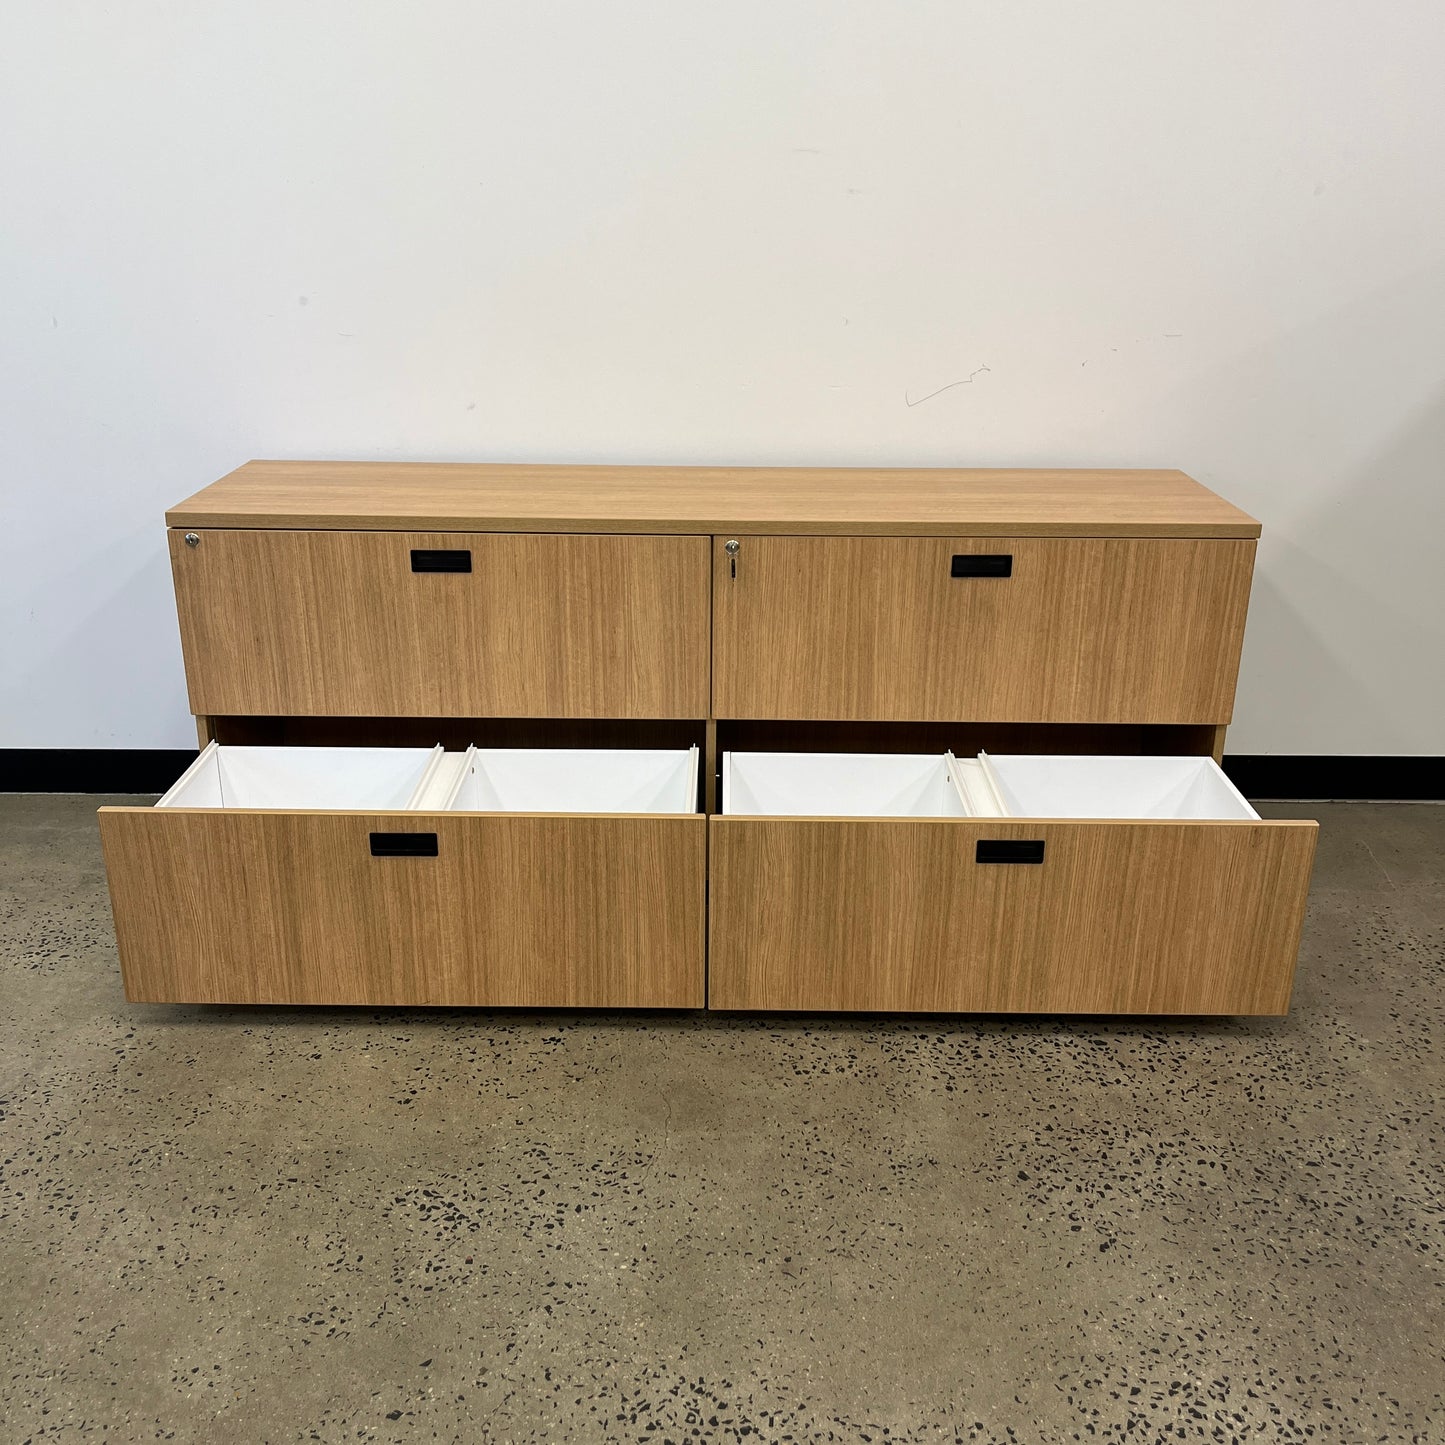 Long Buffet Style File Cabinets in Wooden Laminate